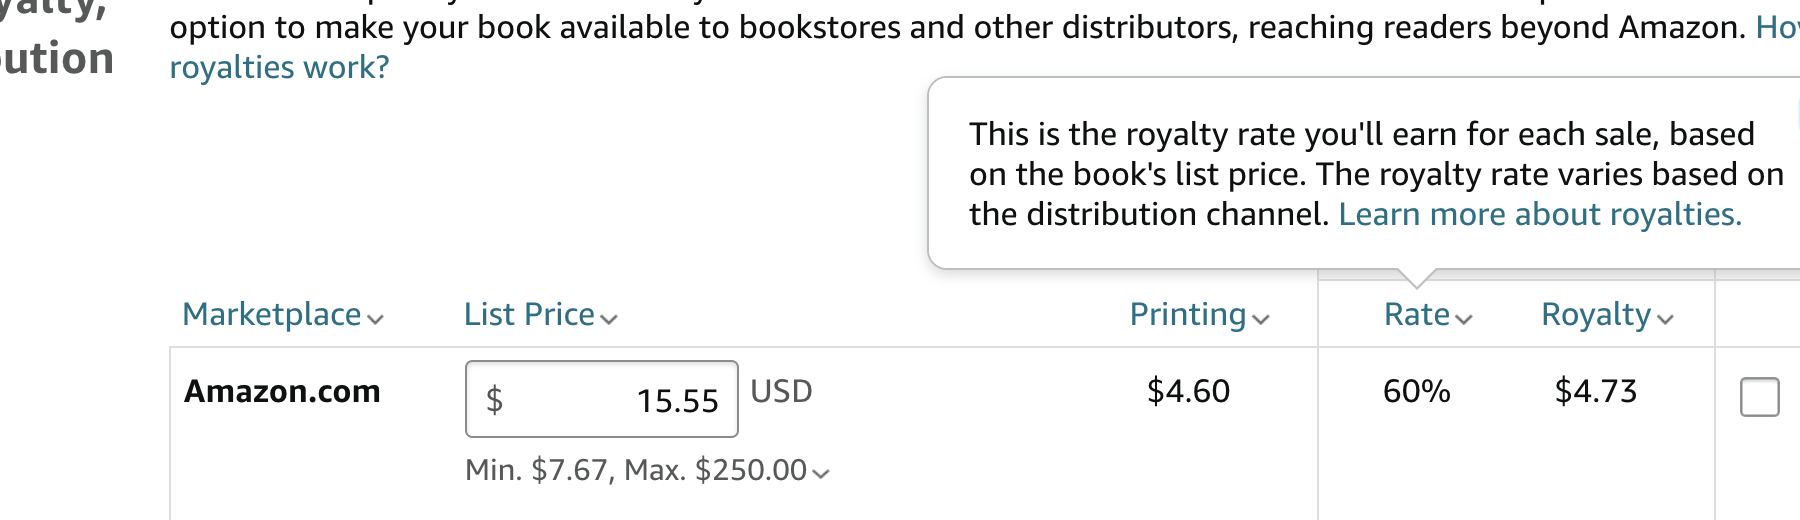 example of royalties calculation for paperback book on amazon kdp